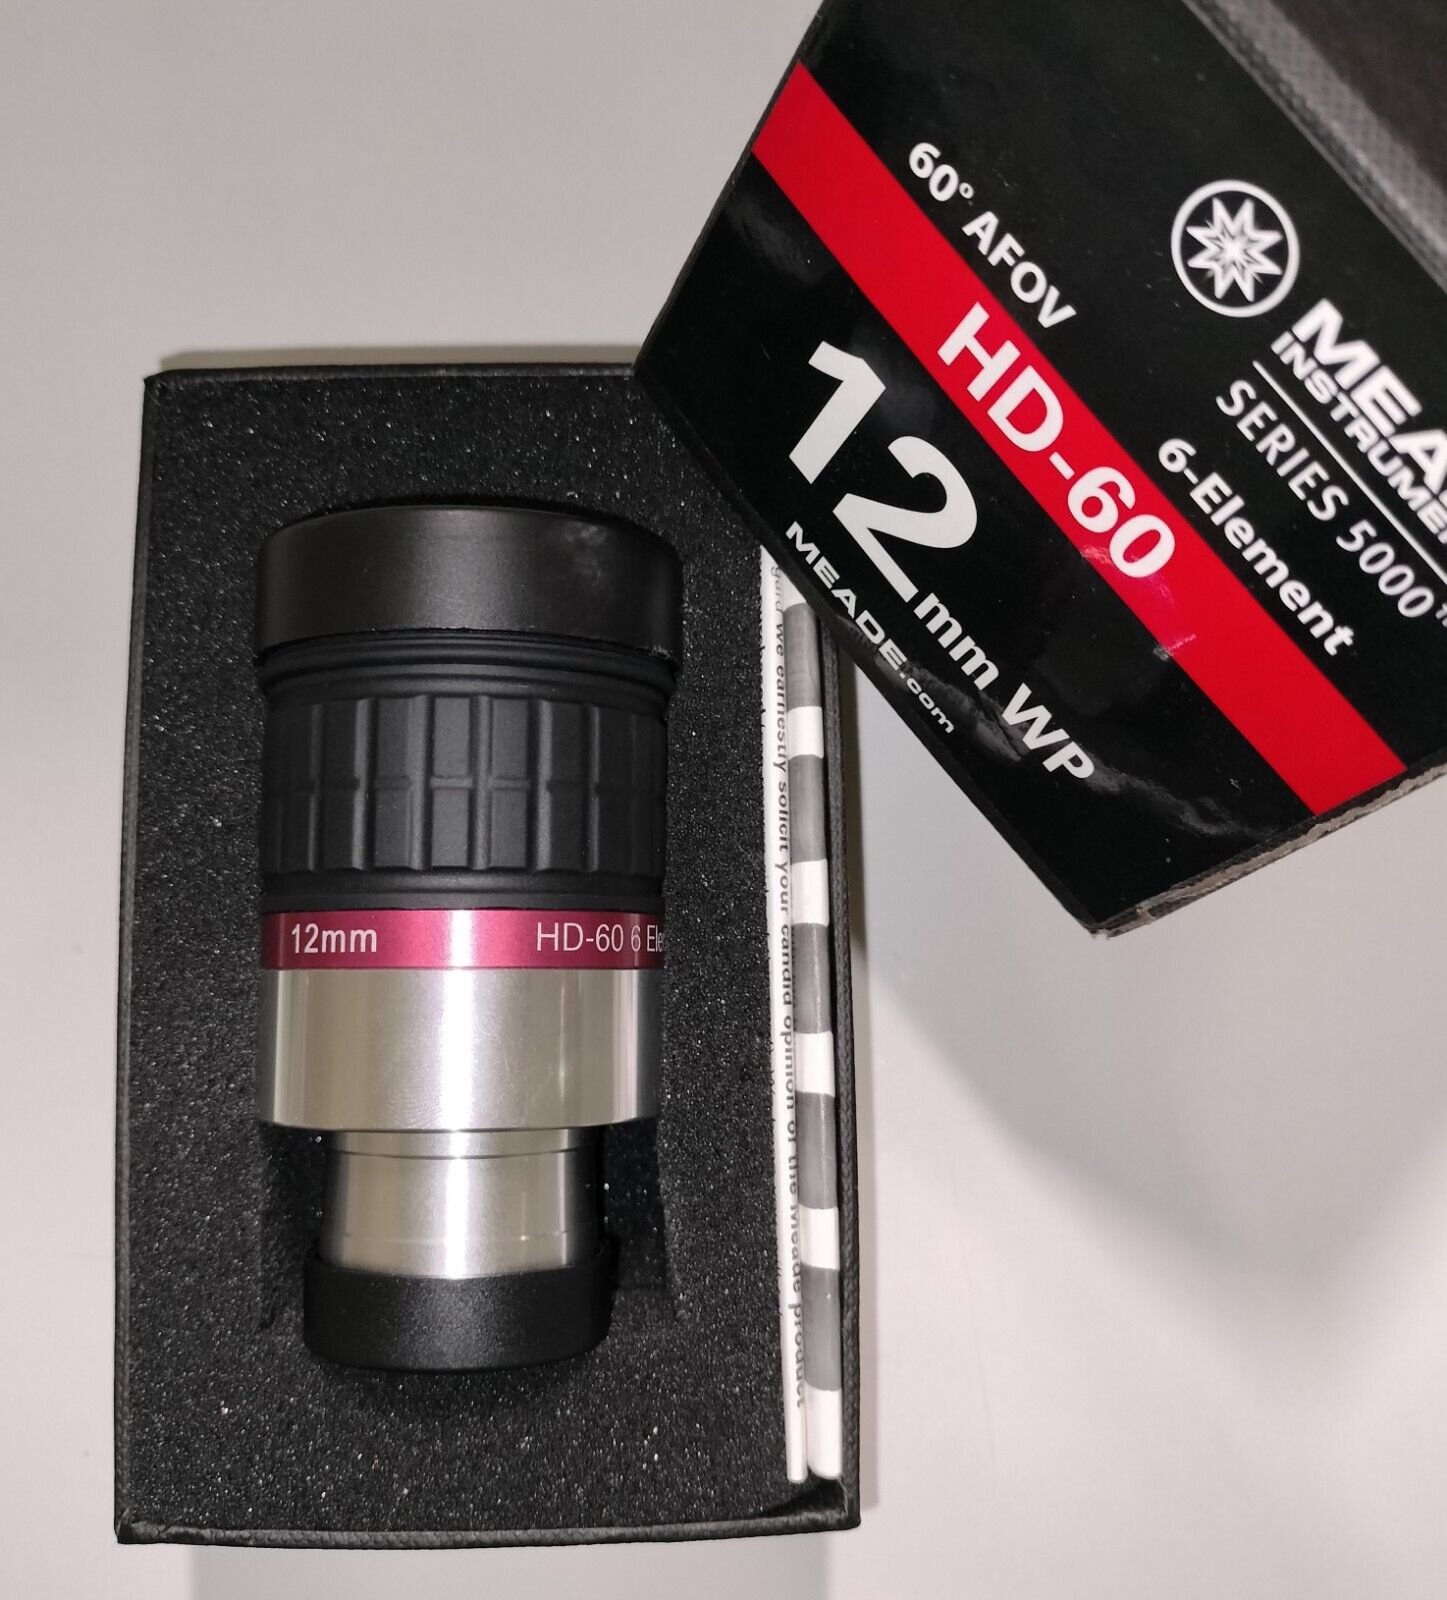 Meade HD-60 Series 5000 12mm Eyepiece - 60 Degree - Great Condition